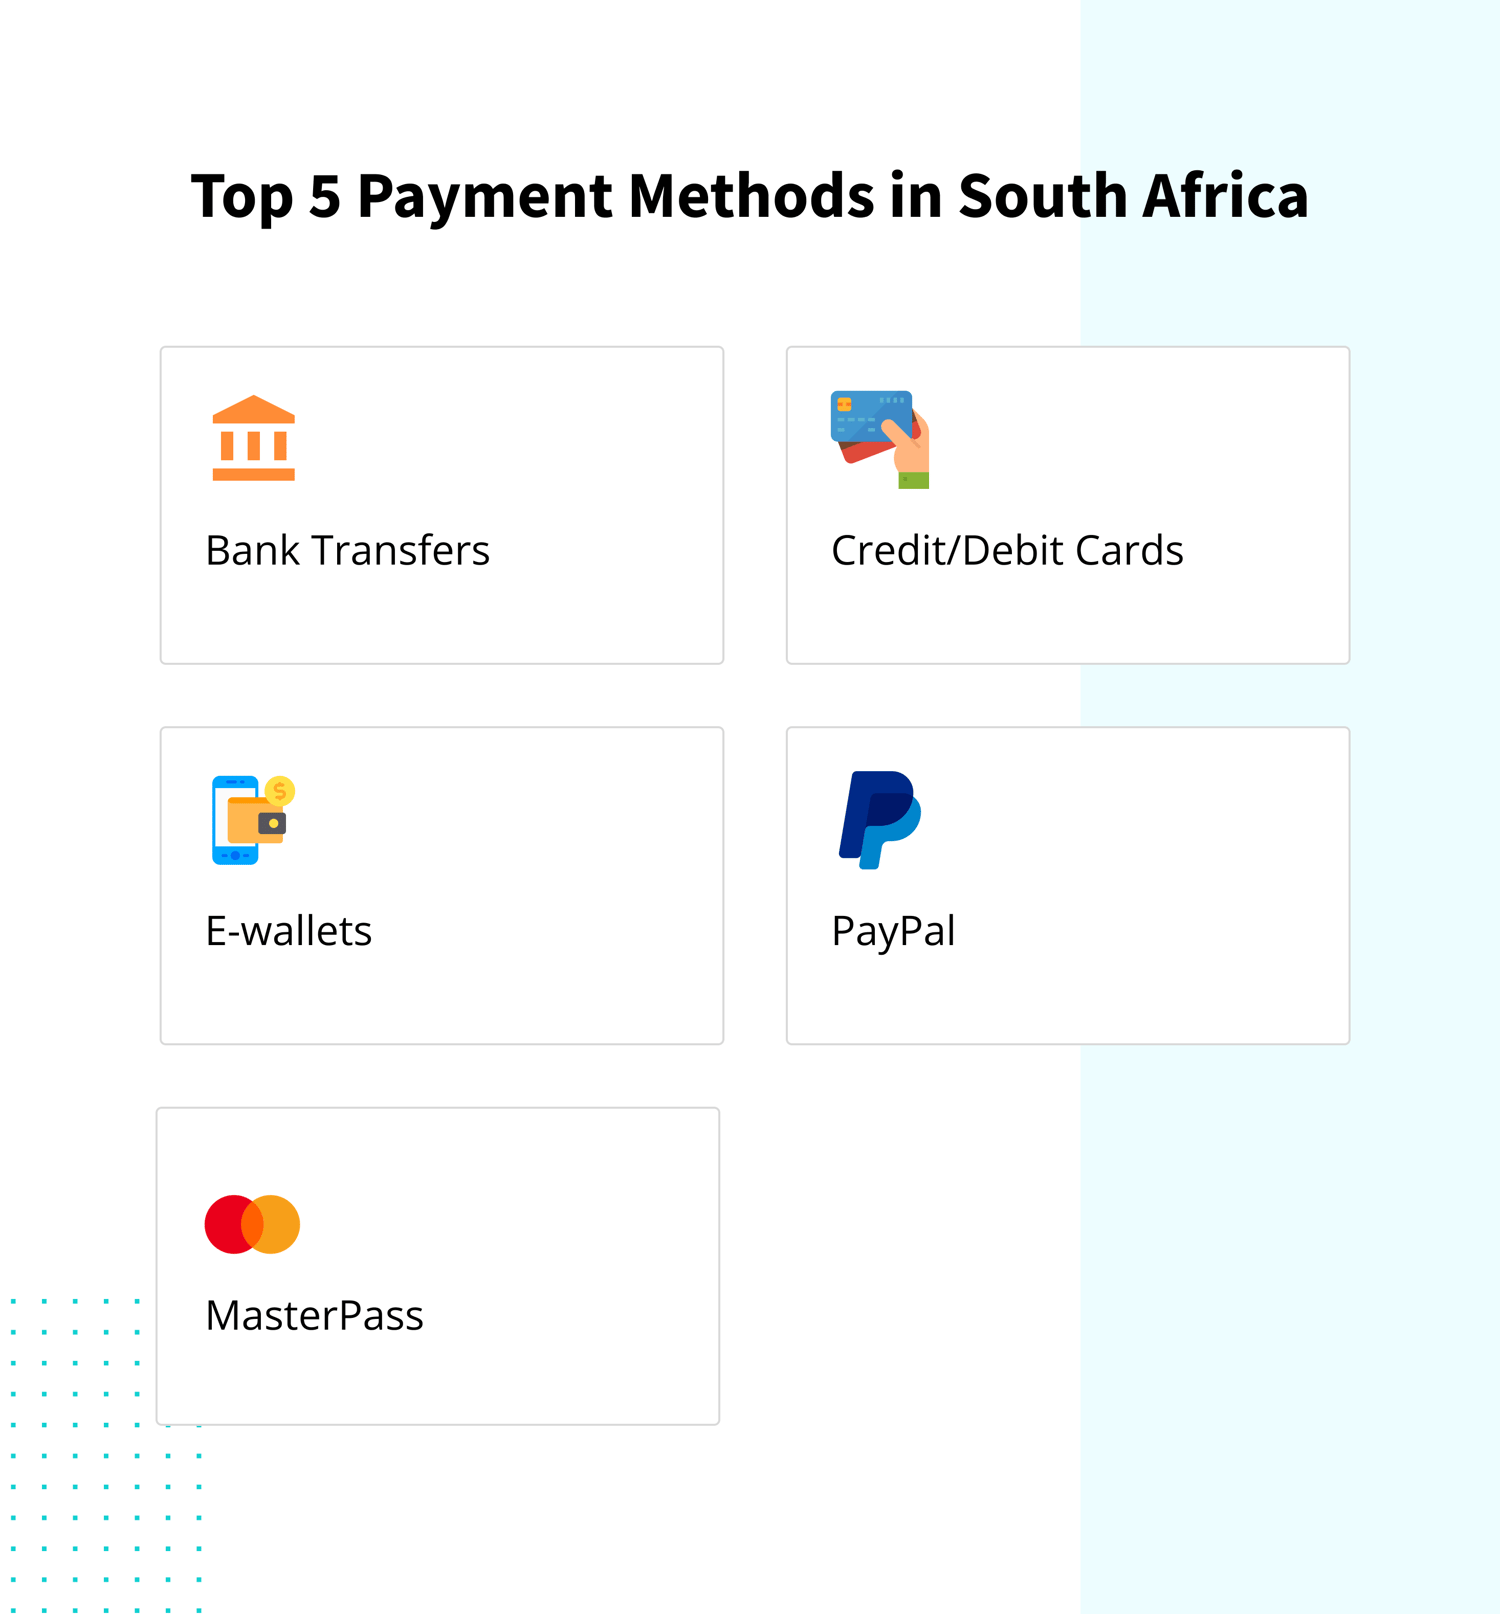 Top 5 Payment Methods in South Africa